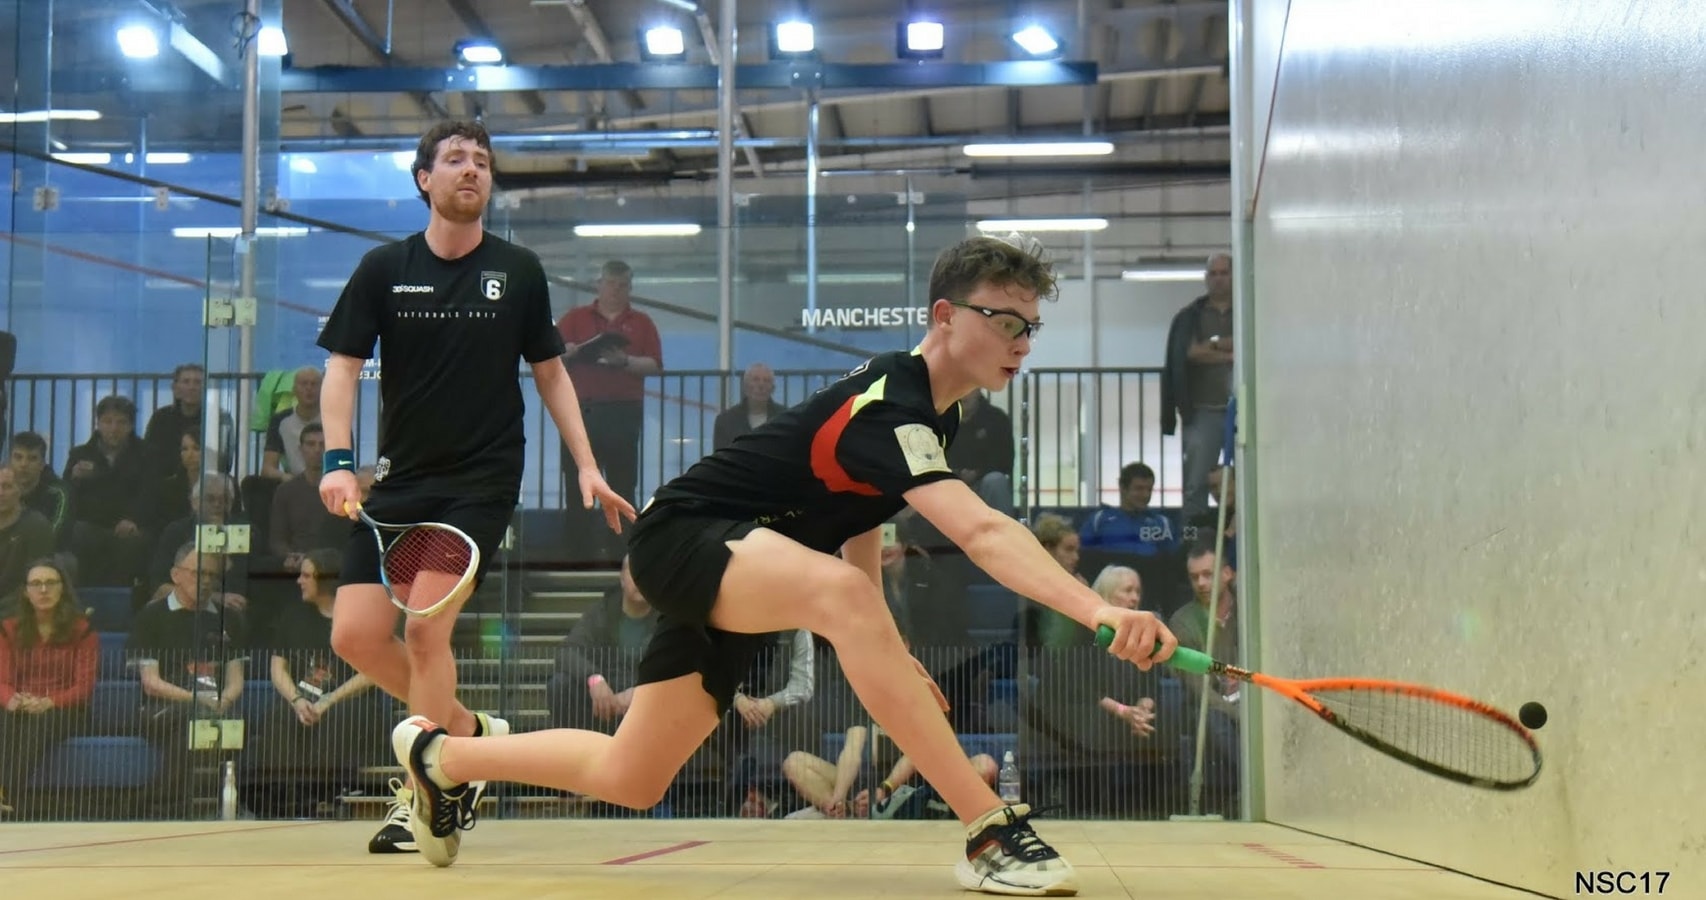 Sam Todd competed in the men's qualifying draw at the National Squash Championships in Manchester 